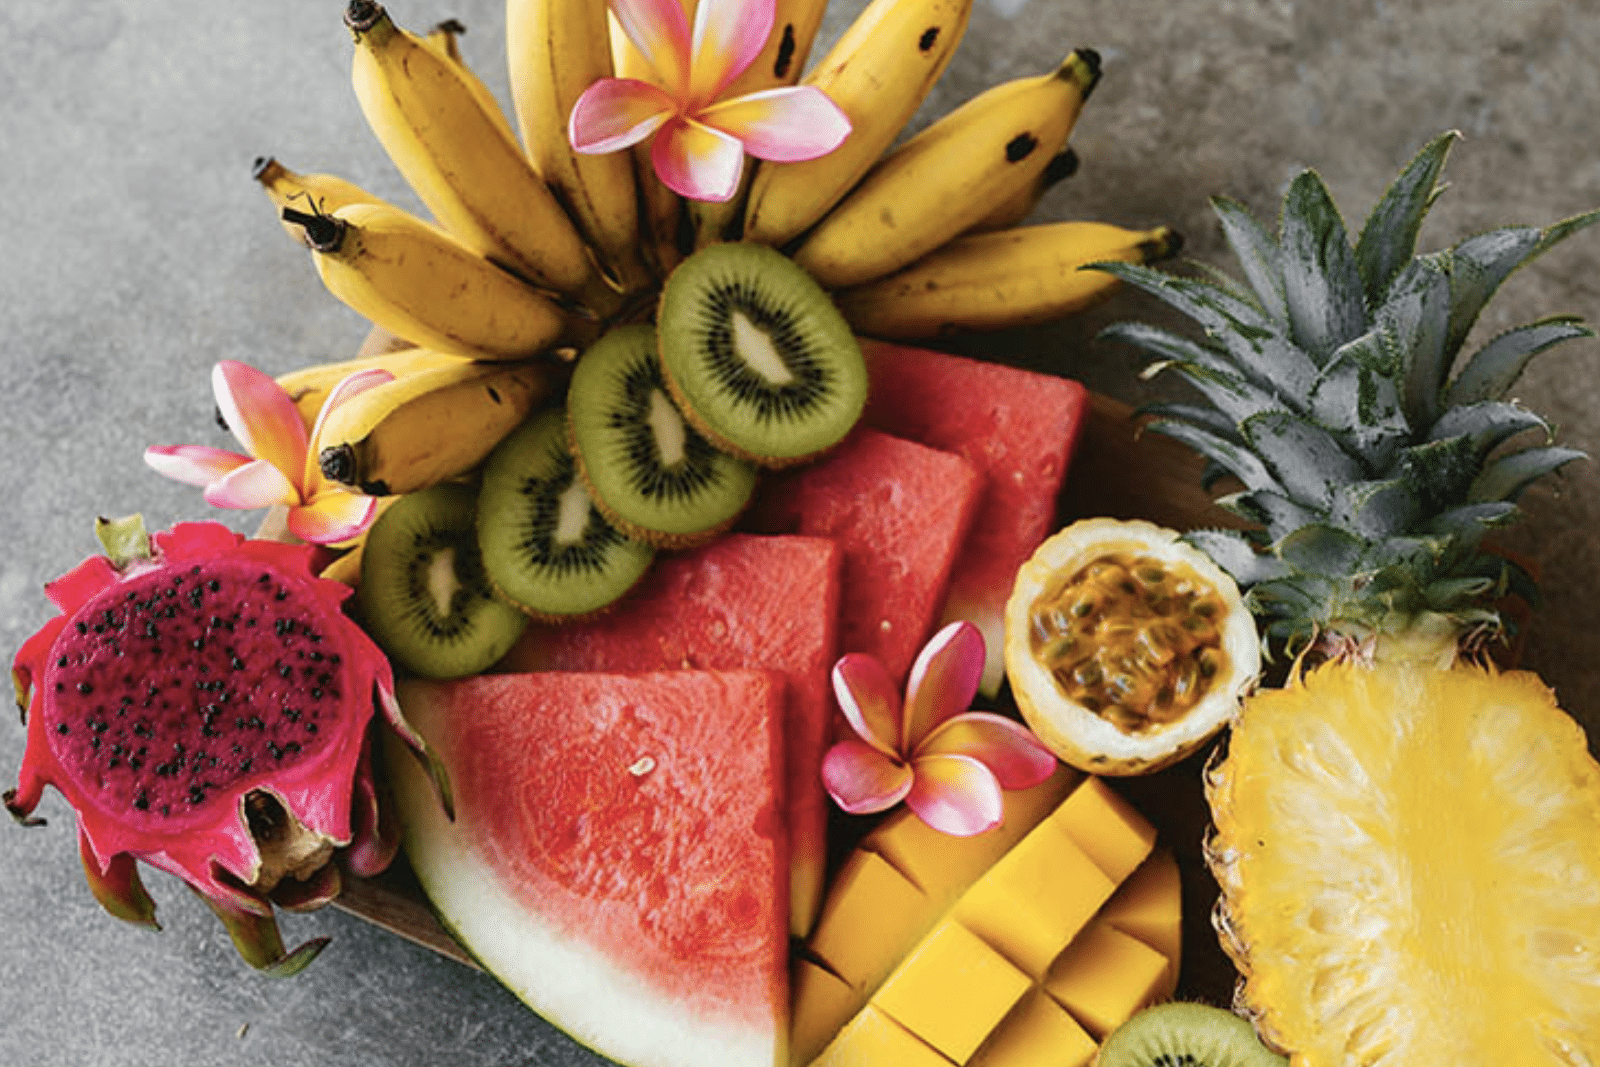 Delicious fresh fruit laid out on a stone board for guests of Upstate Studios Bali retreat to enjoy.